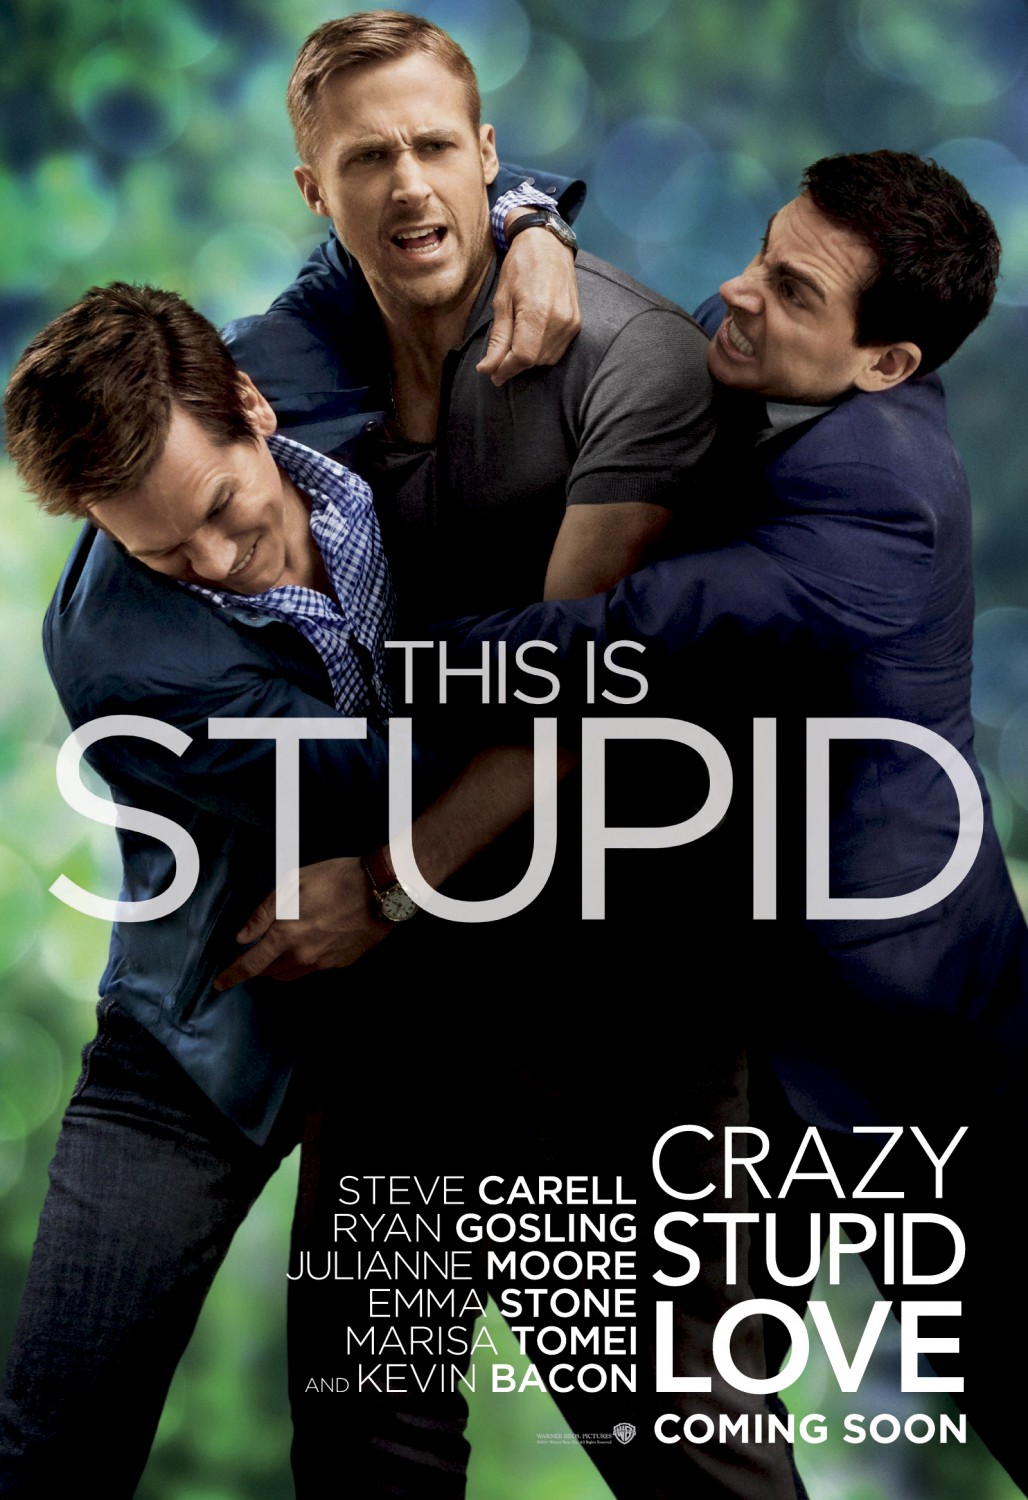 Extra Large Movie Poster Image for Crazy, Stupid, Love. (#6 of 7)